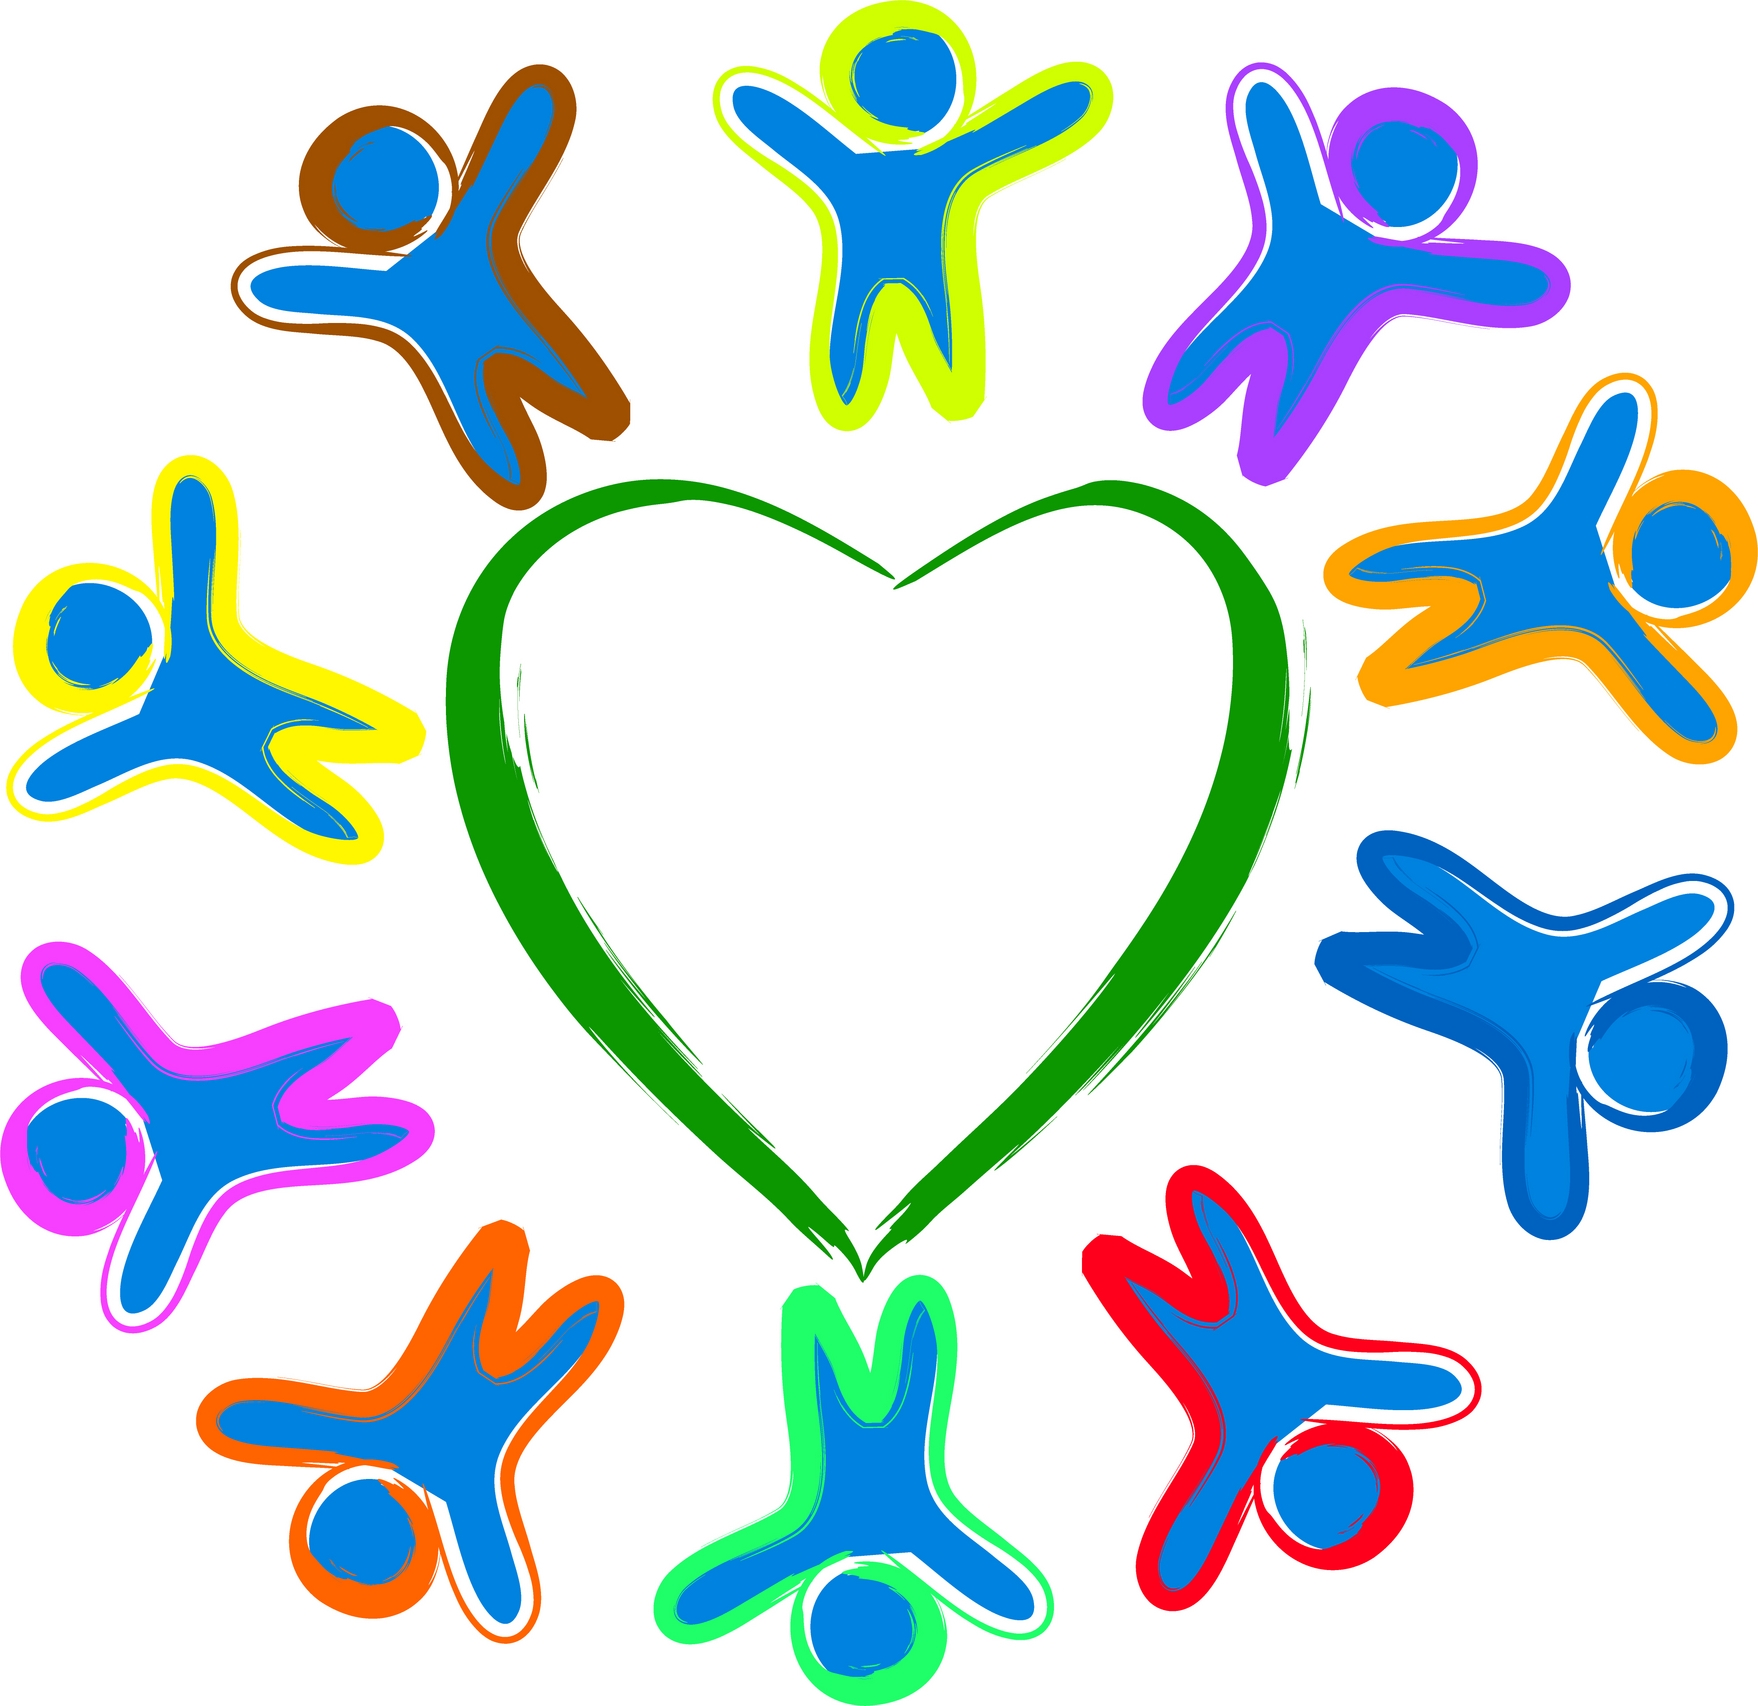 Free Photo Of Helping People, Download Free Photo Of Helping People png image, Free ClipArts on Clipart Library